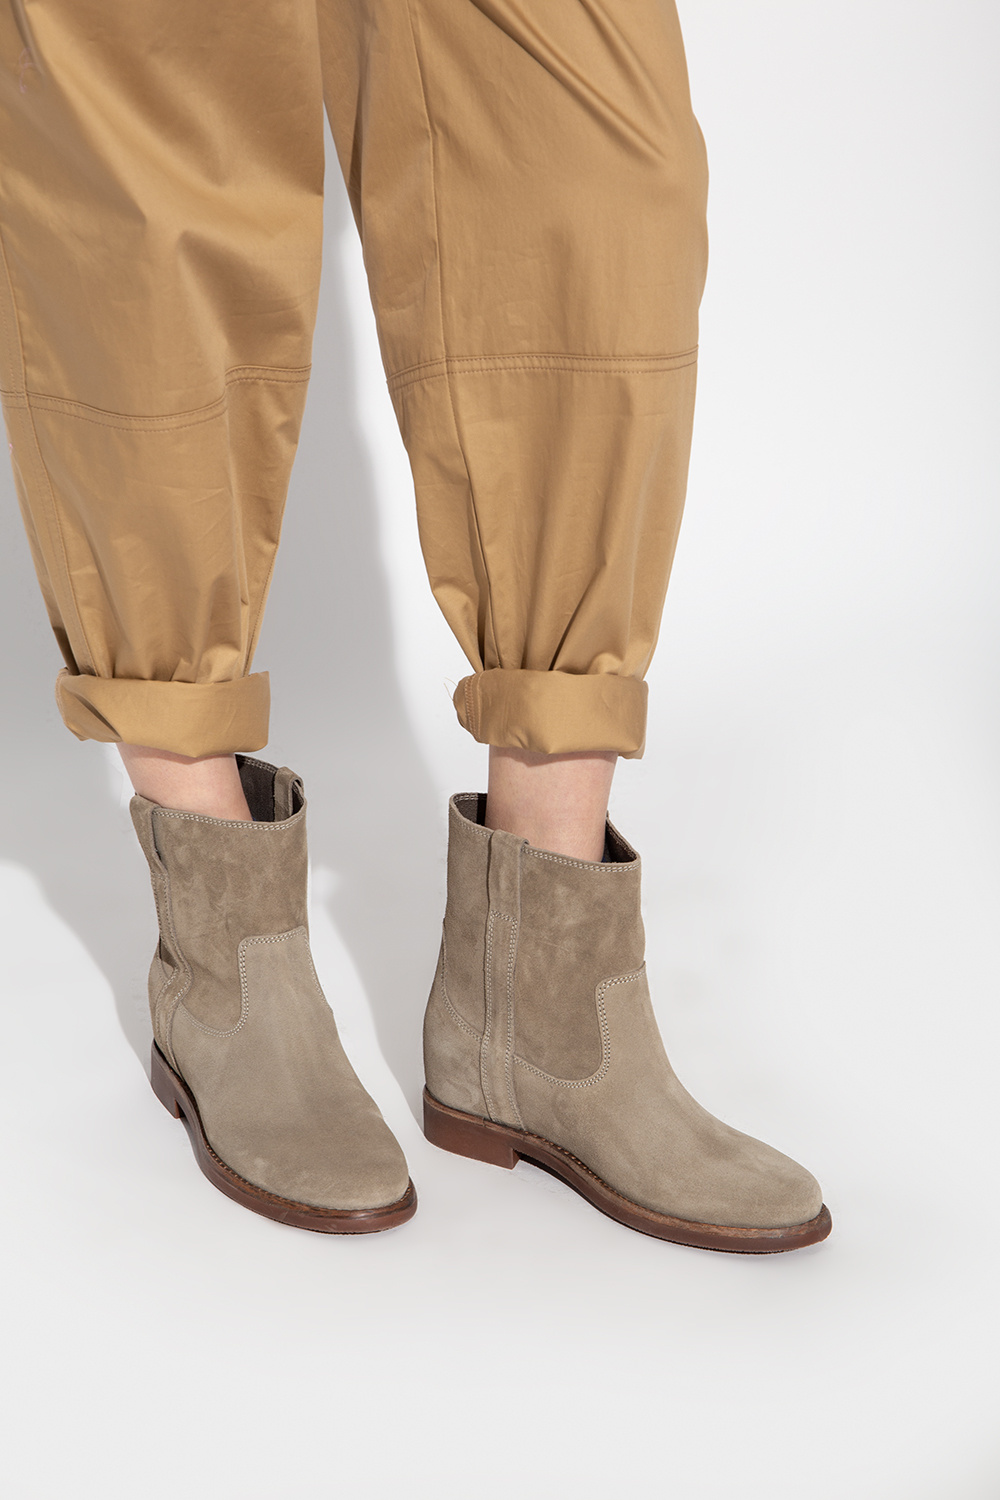 Isabel Marant ‘Susee’ suede Follow boots